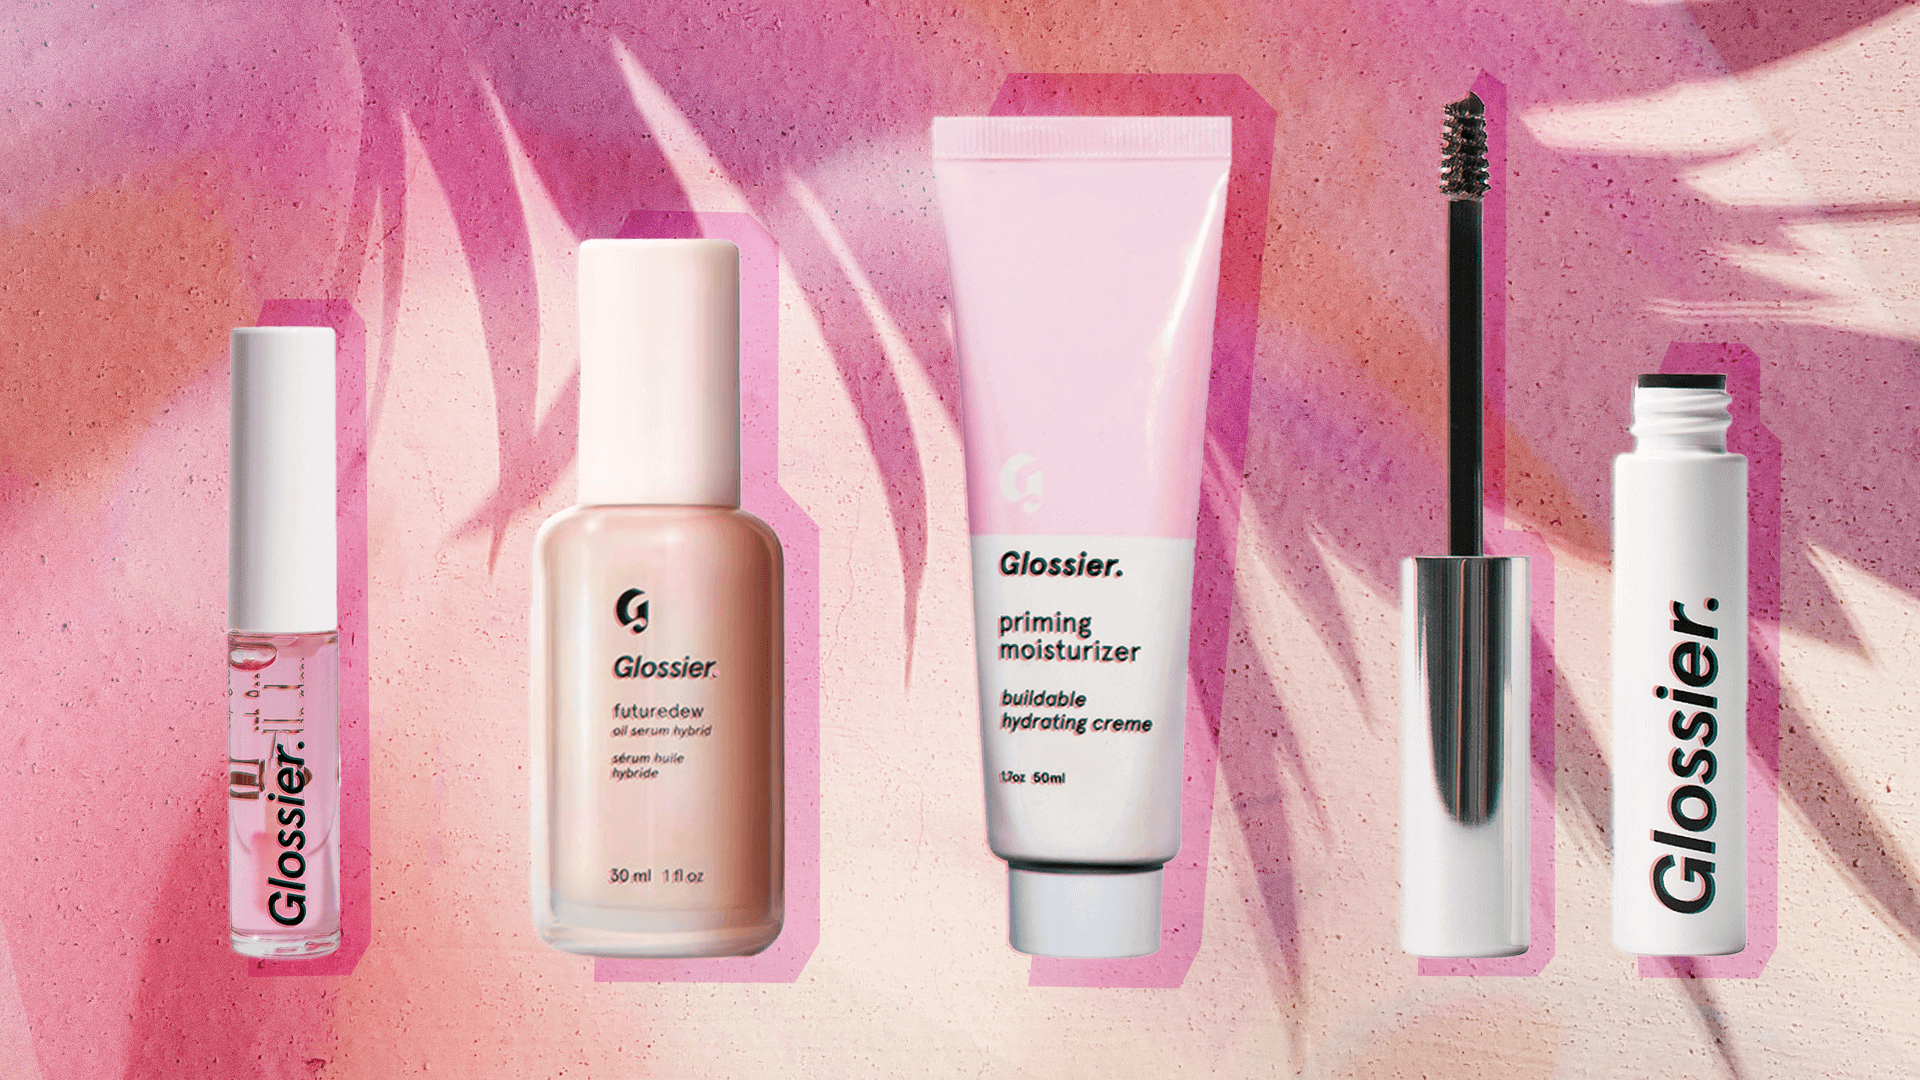 Olivia x Glossier makeup bag for those who don't want to go